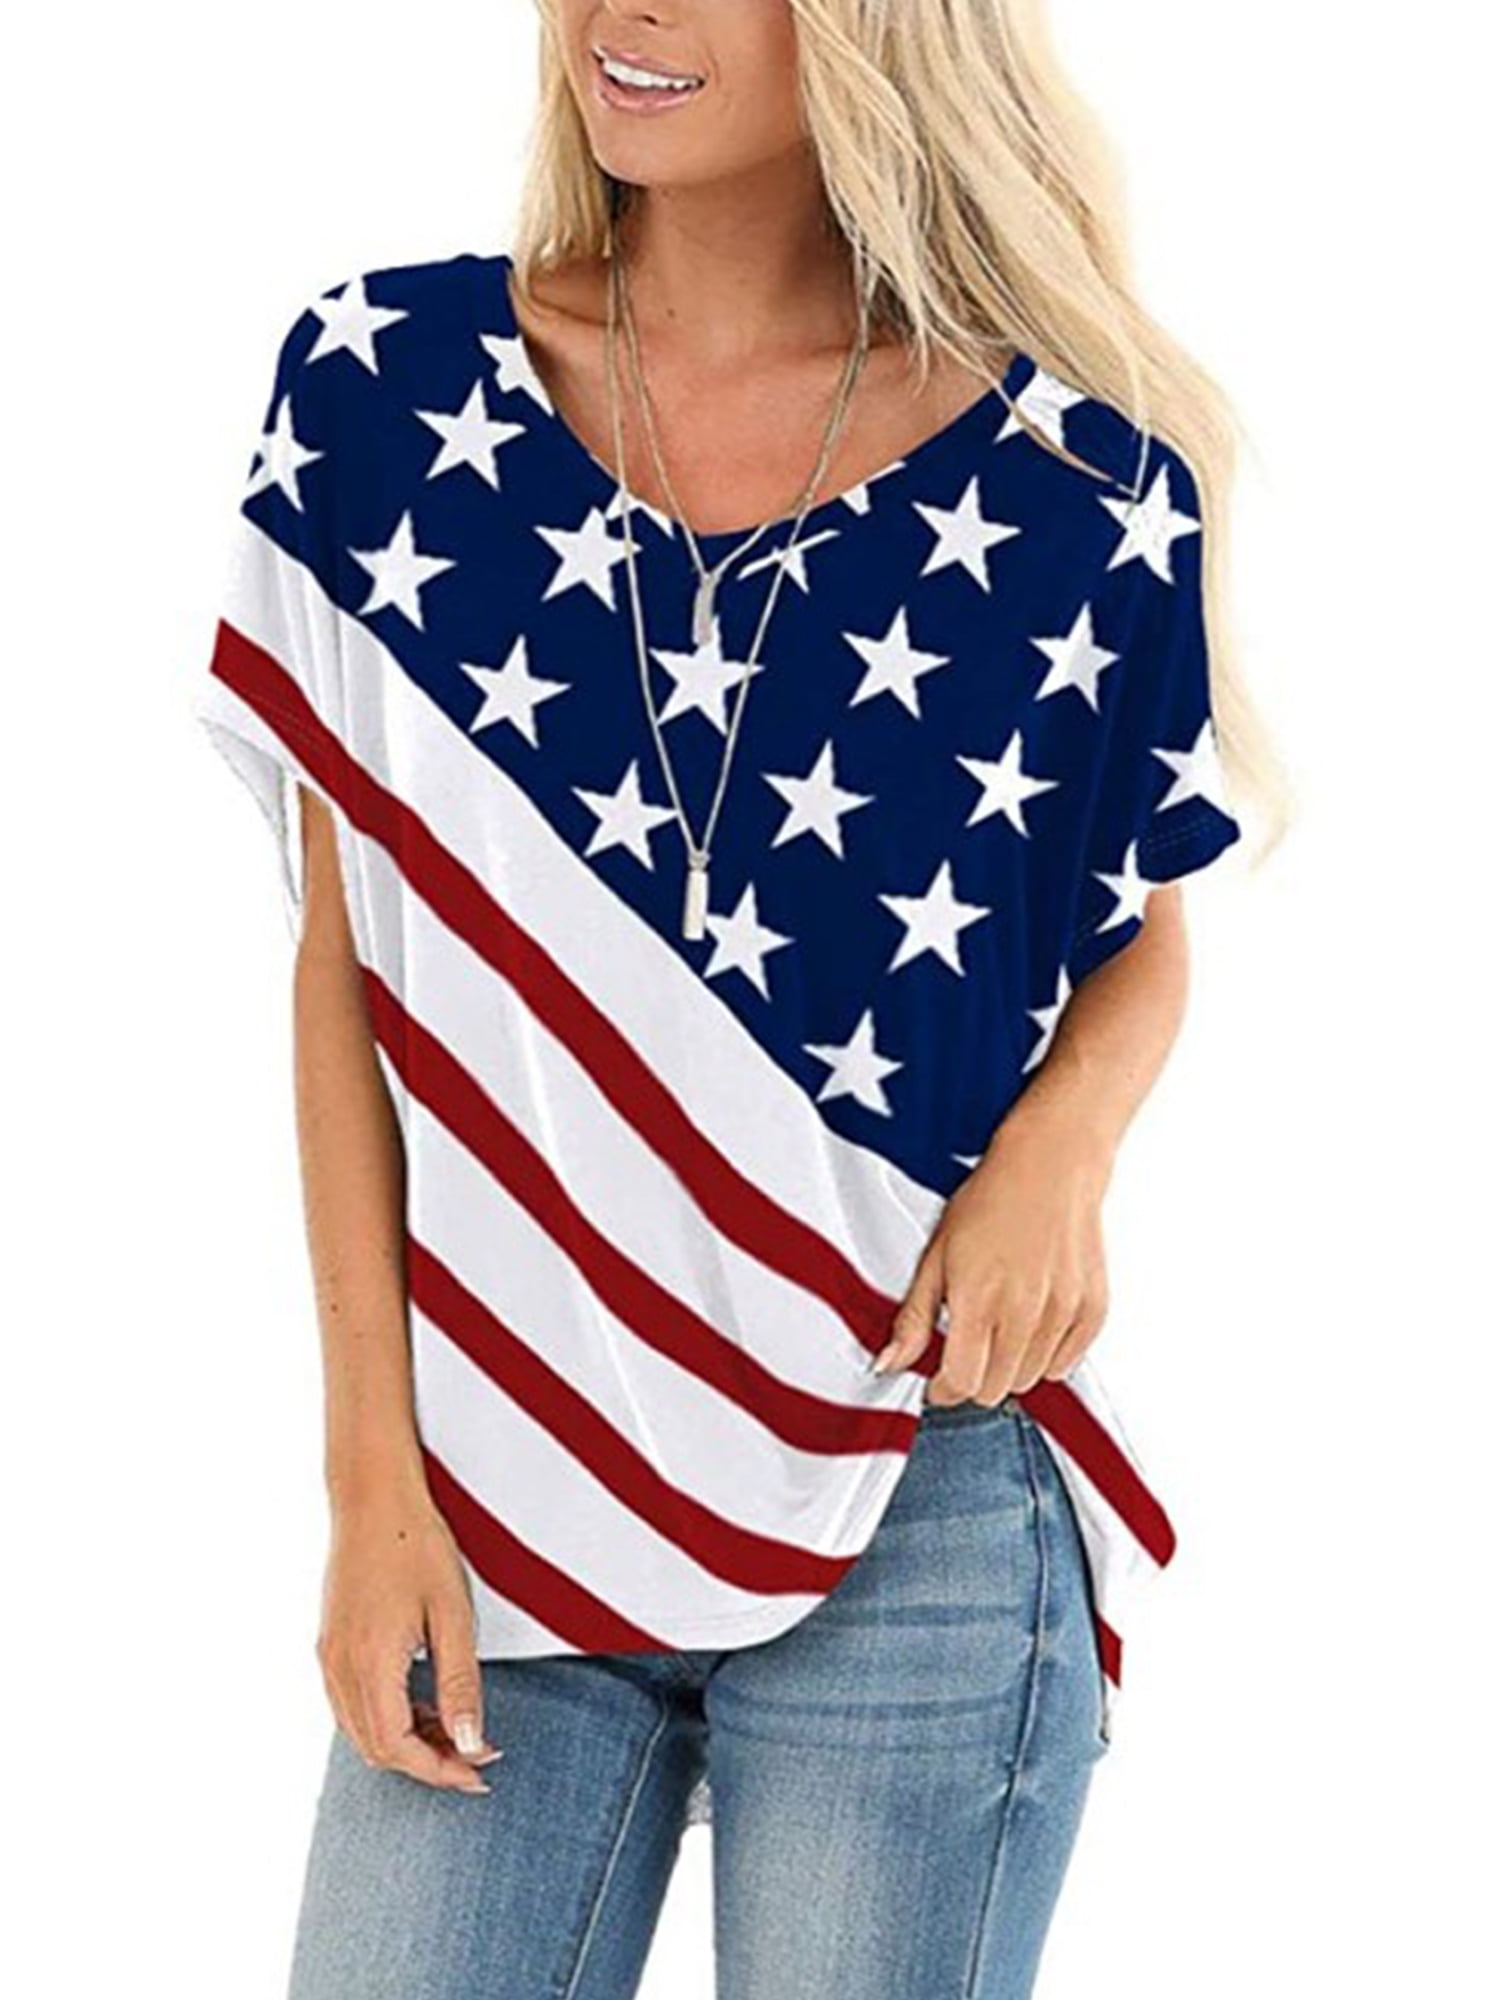 T Shirt for Women,POTO Womens Fashionable Loose American Flag Short-Sleeved Printed Tees Shirt Tops Blouse S-3XL 